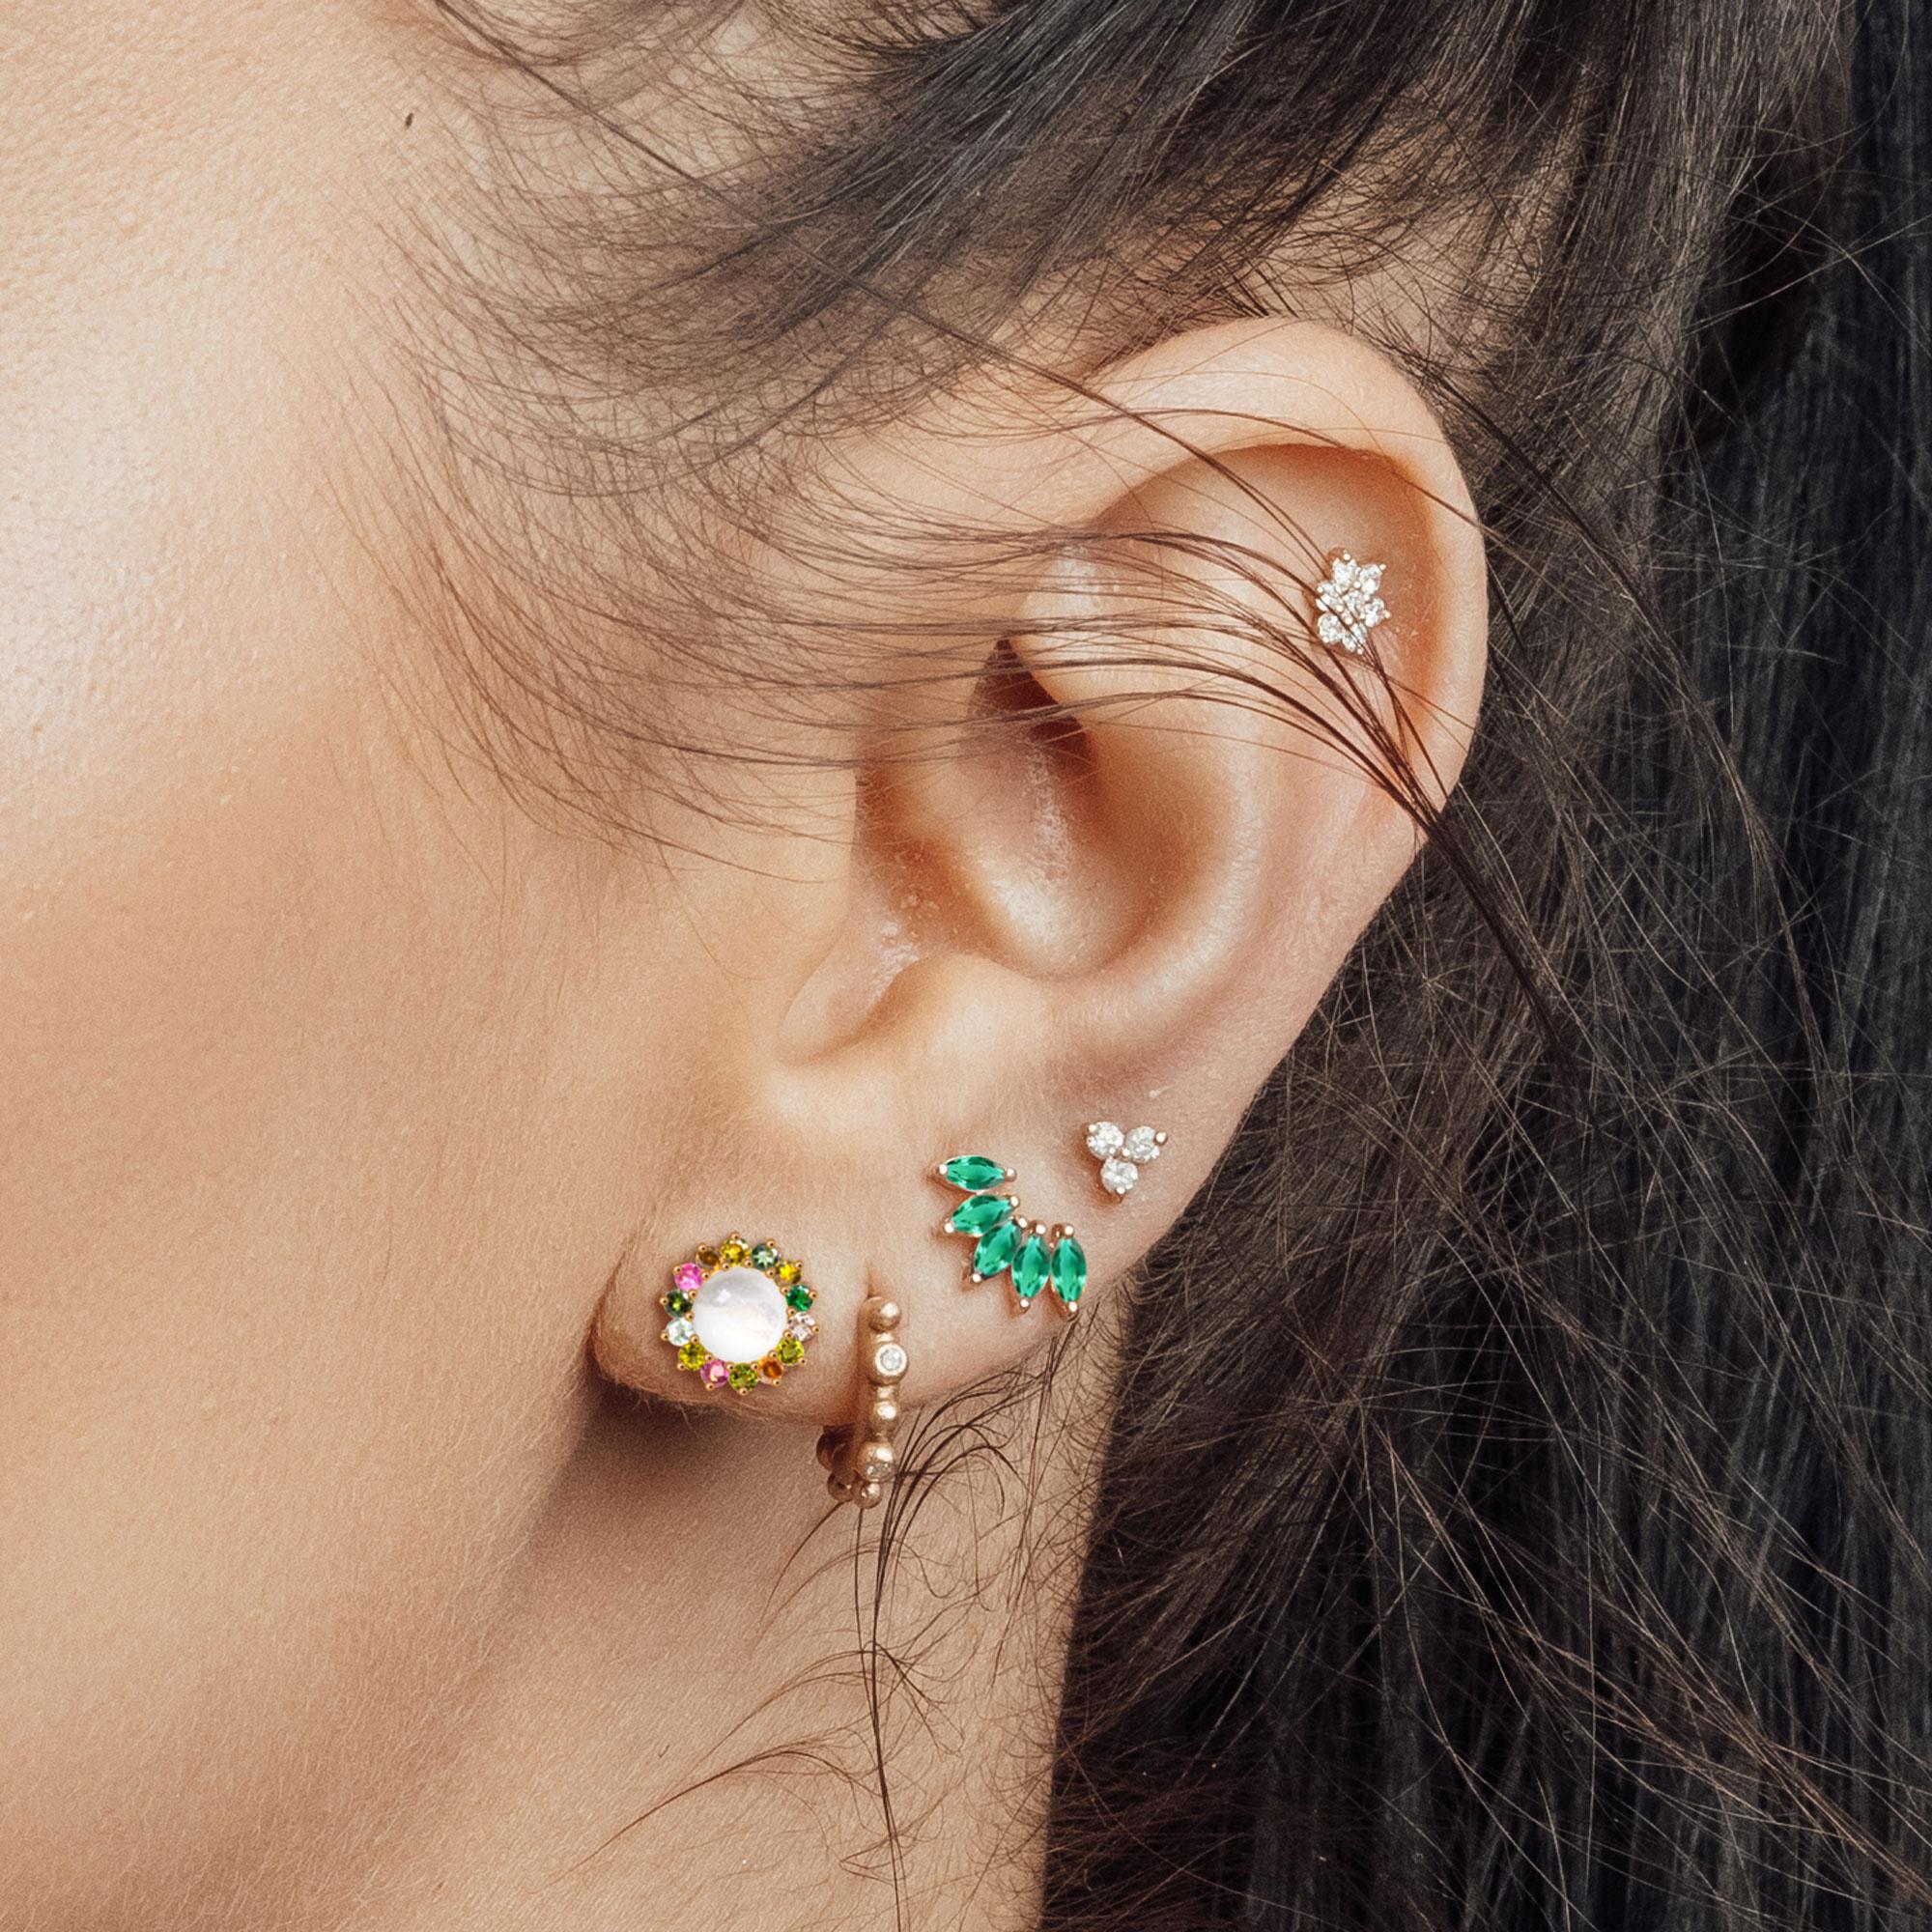 Inspired by the gorgeous leaves of nature and reimagined into a little piece of artistry! This pretty 18k Emerald Gold Stud earrings design features five marquise-shaped stones beautifully prong set in a half-circle wreath. Finely crafted in a